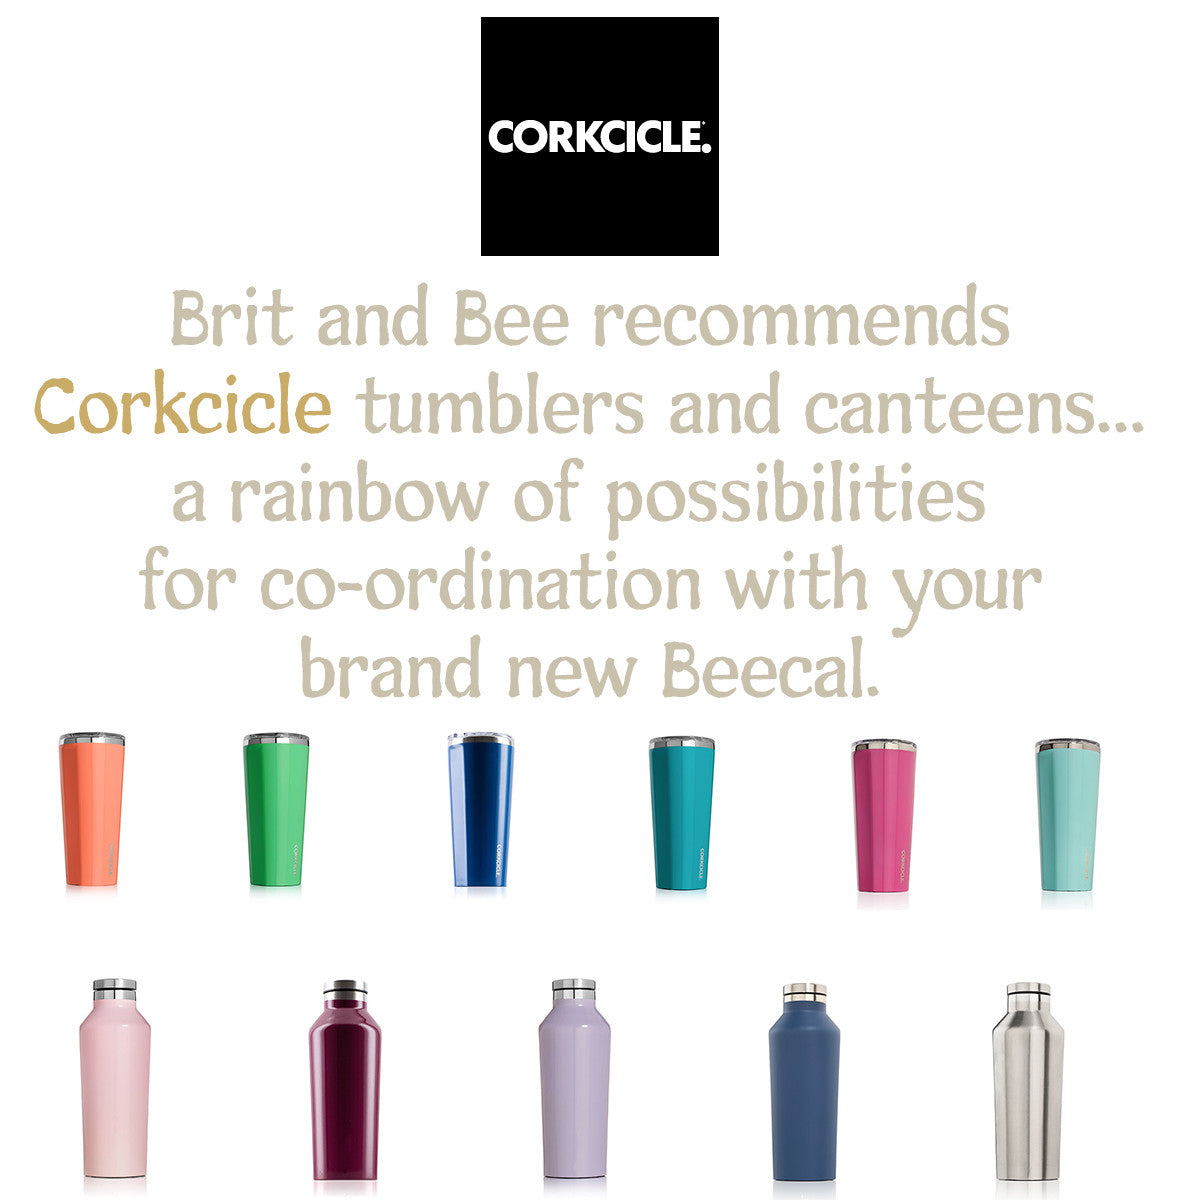 Brit and Bee recommends Corkcicle tumblers and canteens